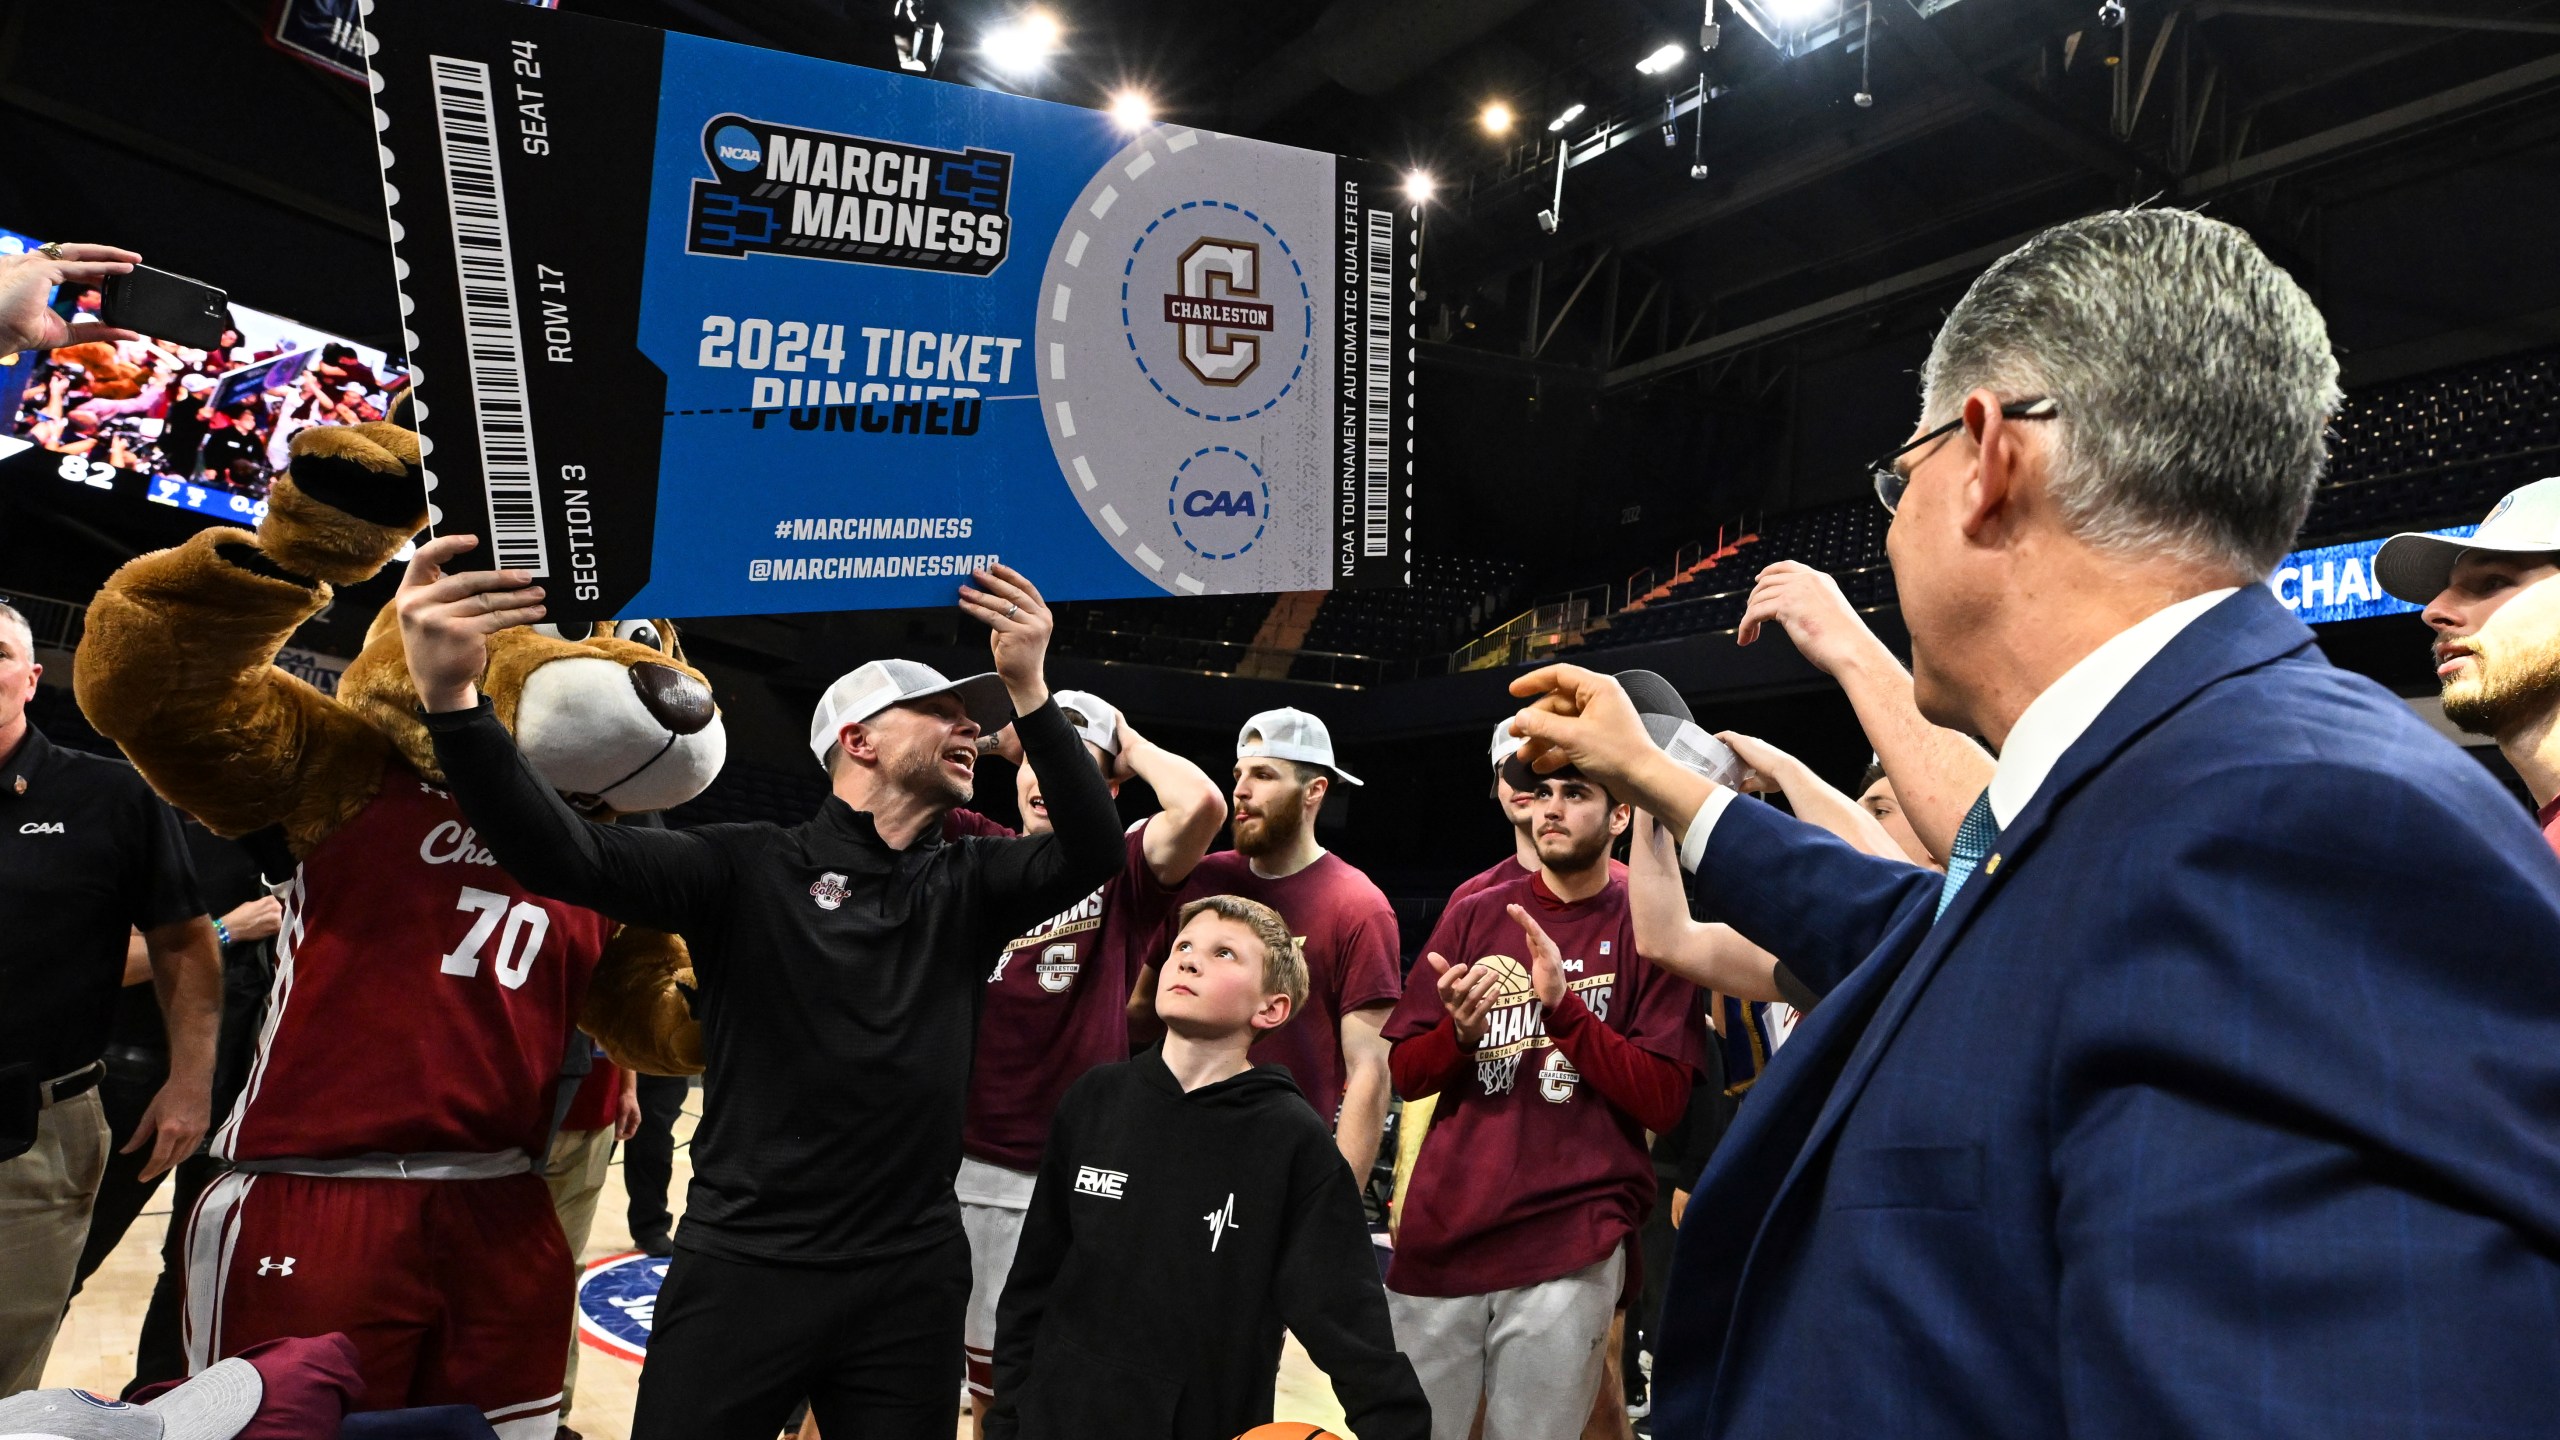 Charleston head coach Pat Kelsey holds a March Madness ticket after defeating Stony Brook in the NCAA college basketball game in the championship of the Coastal Athletic Association conference tournament, Tuesday, March 12, 2024, in Washington. (AP Photo/Terrance Williams)